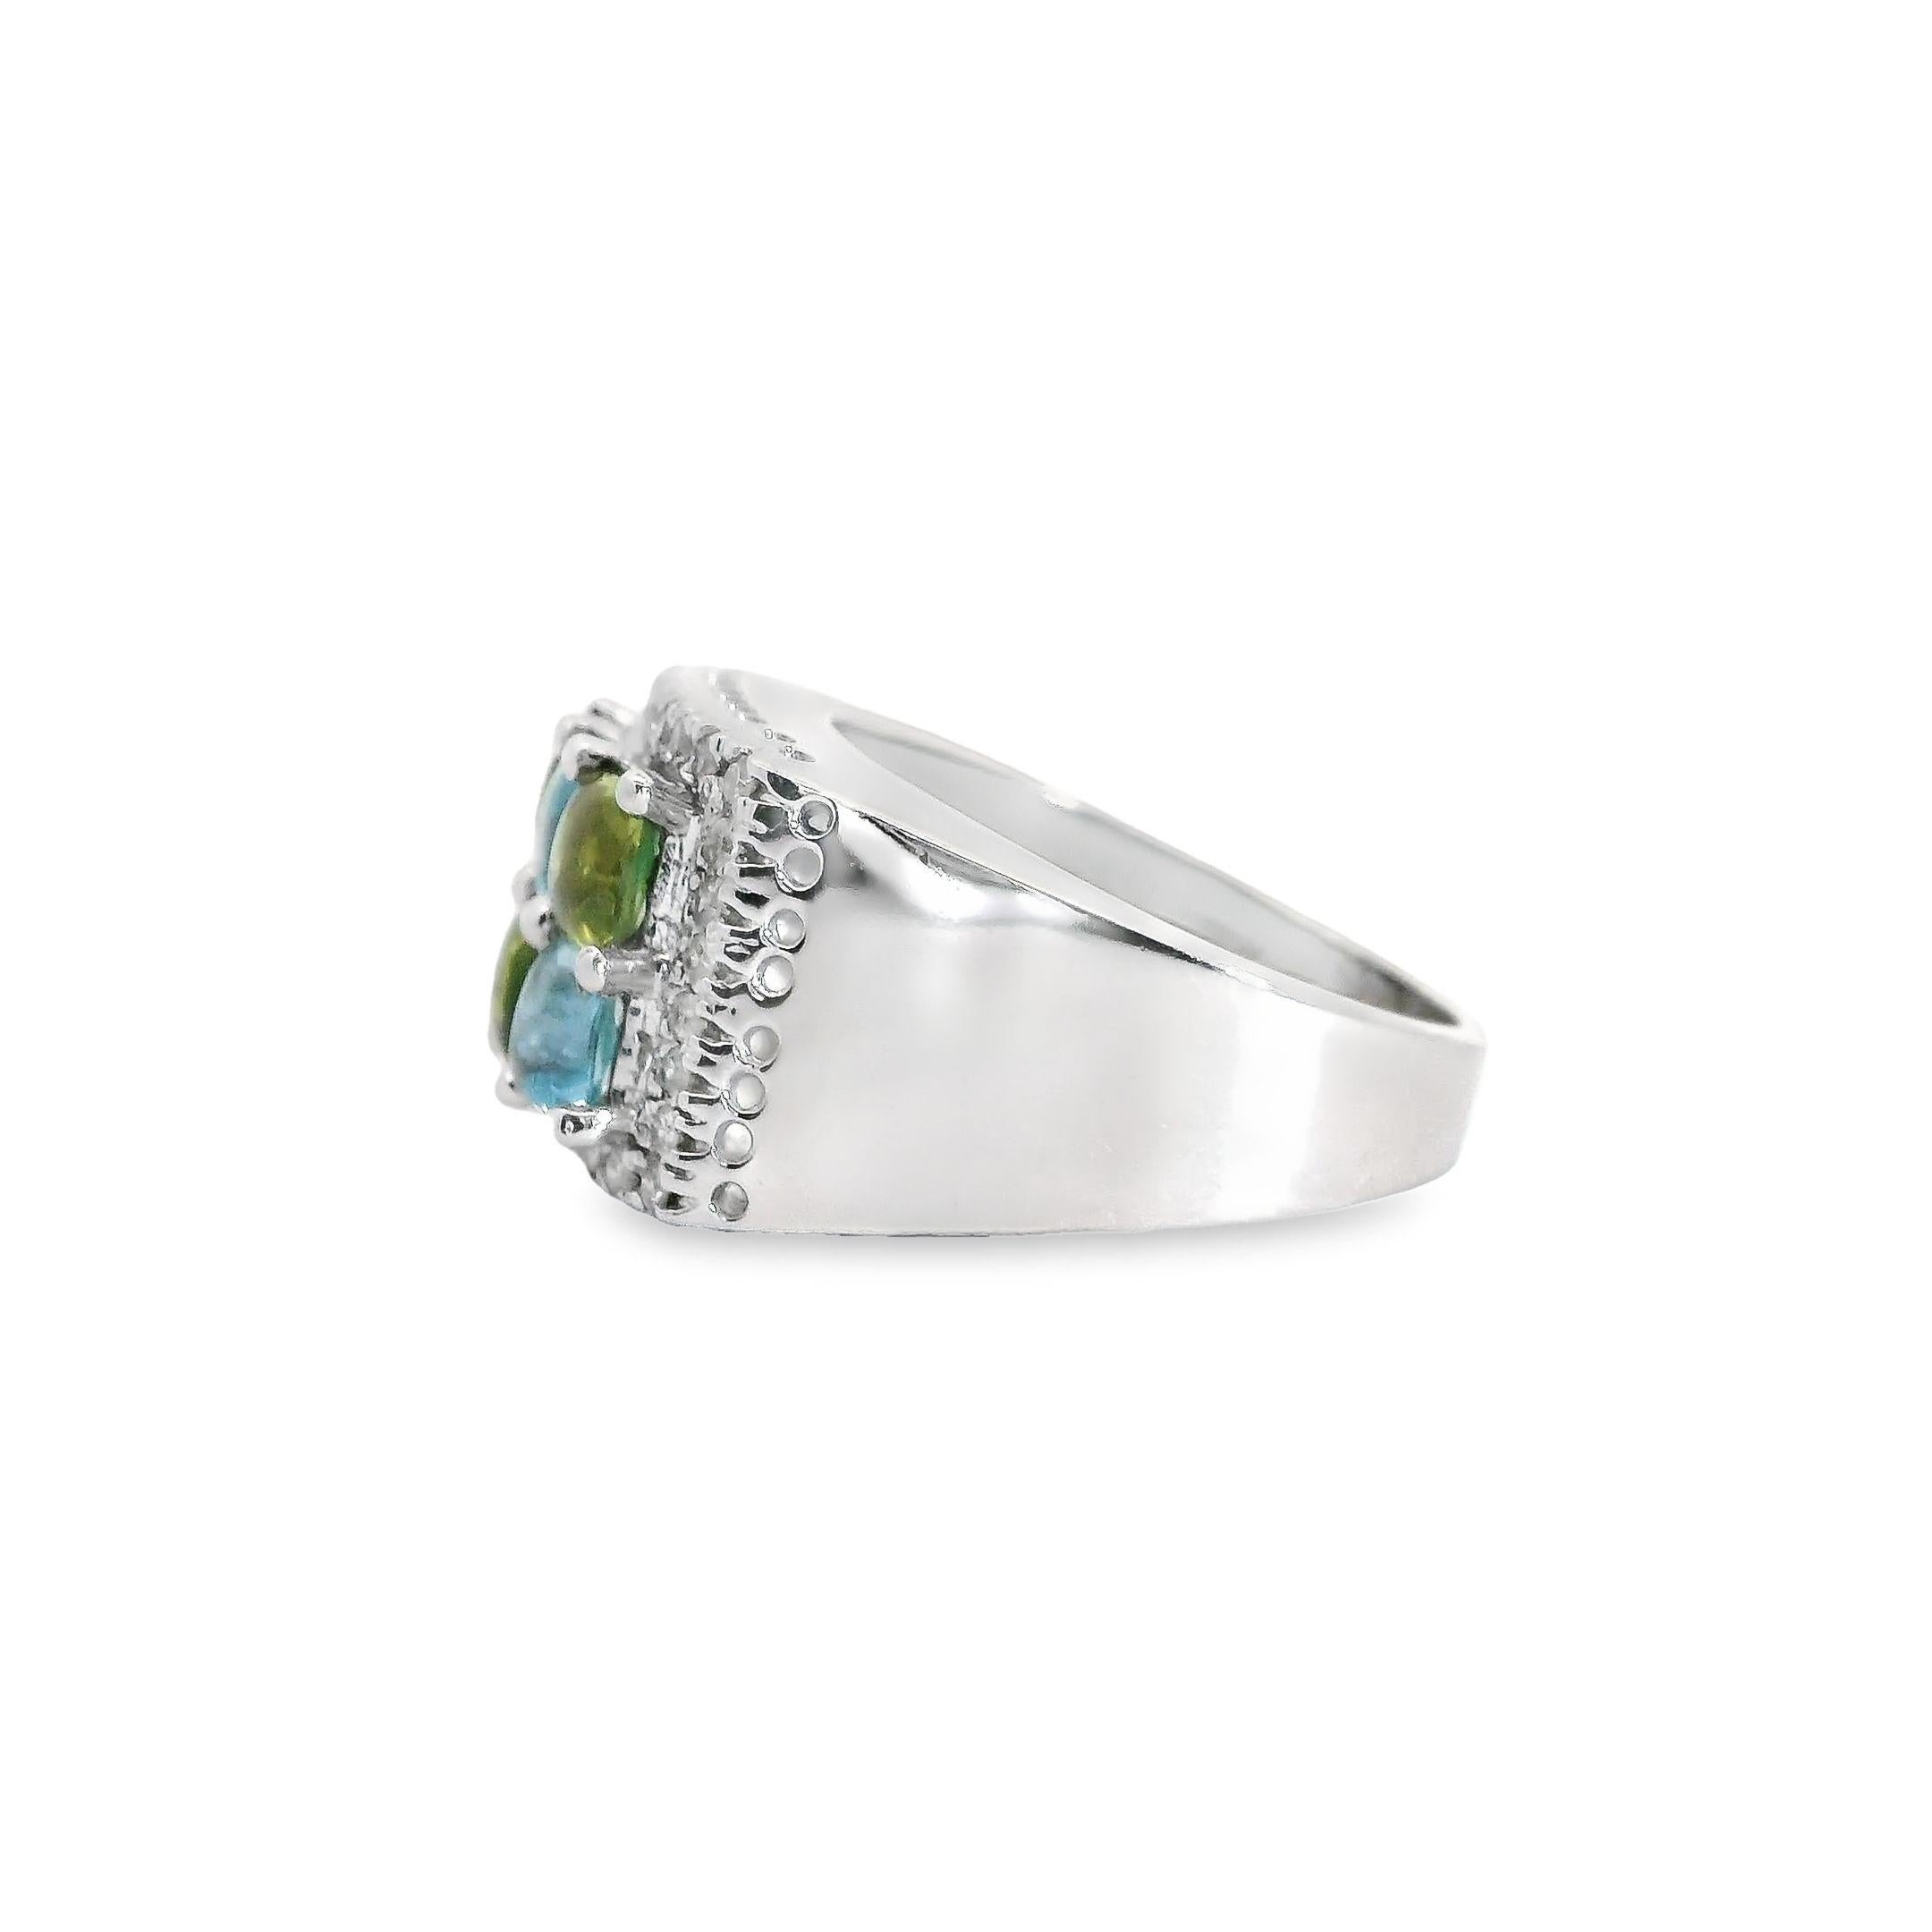 Women's Mosaic Peridot and Blue Topaz Ring and Earrings in 18K White Gold with Diamonds